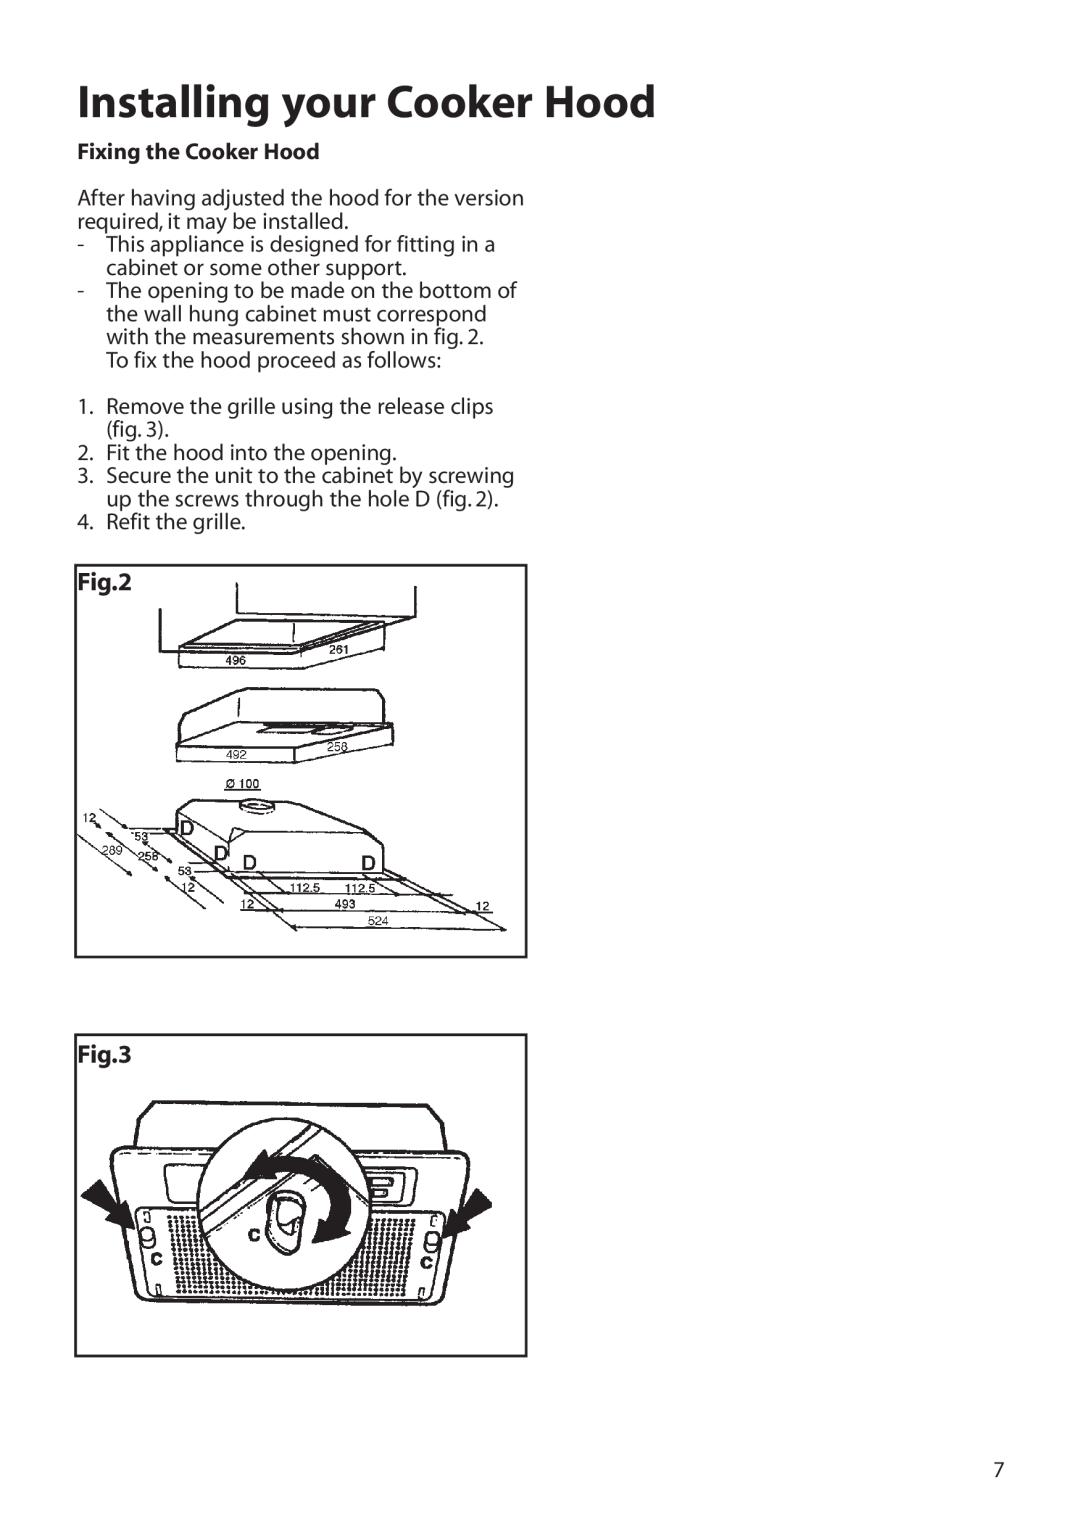 Hotpoint HTU30 manual Installing your Cooker Hood, Fixing the Cooker Hood 